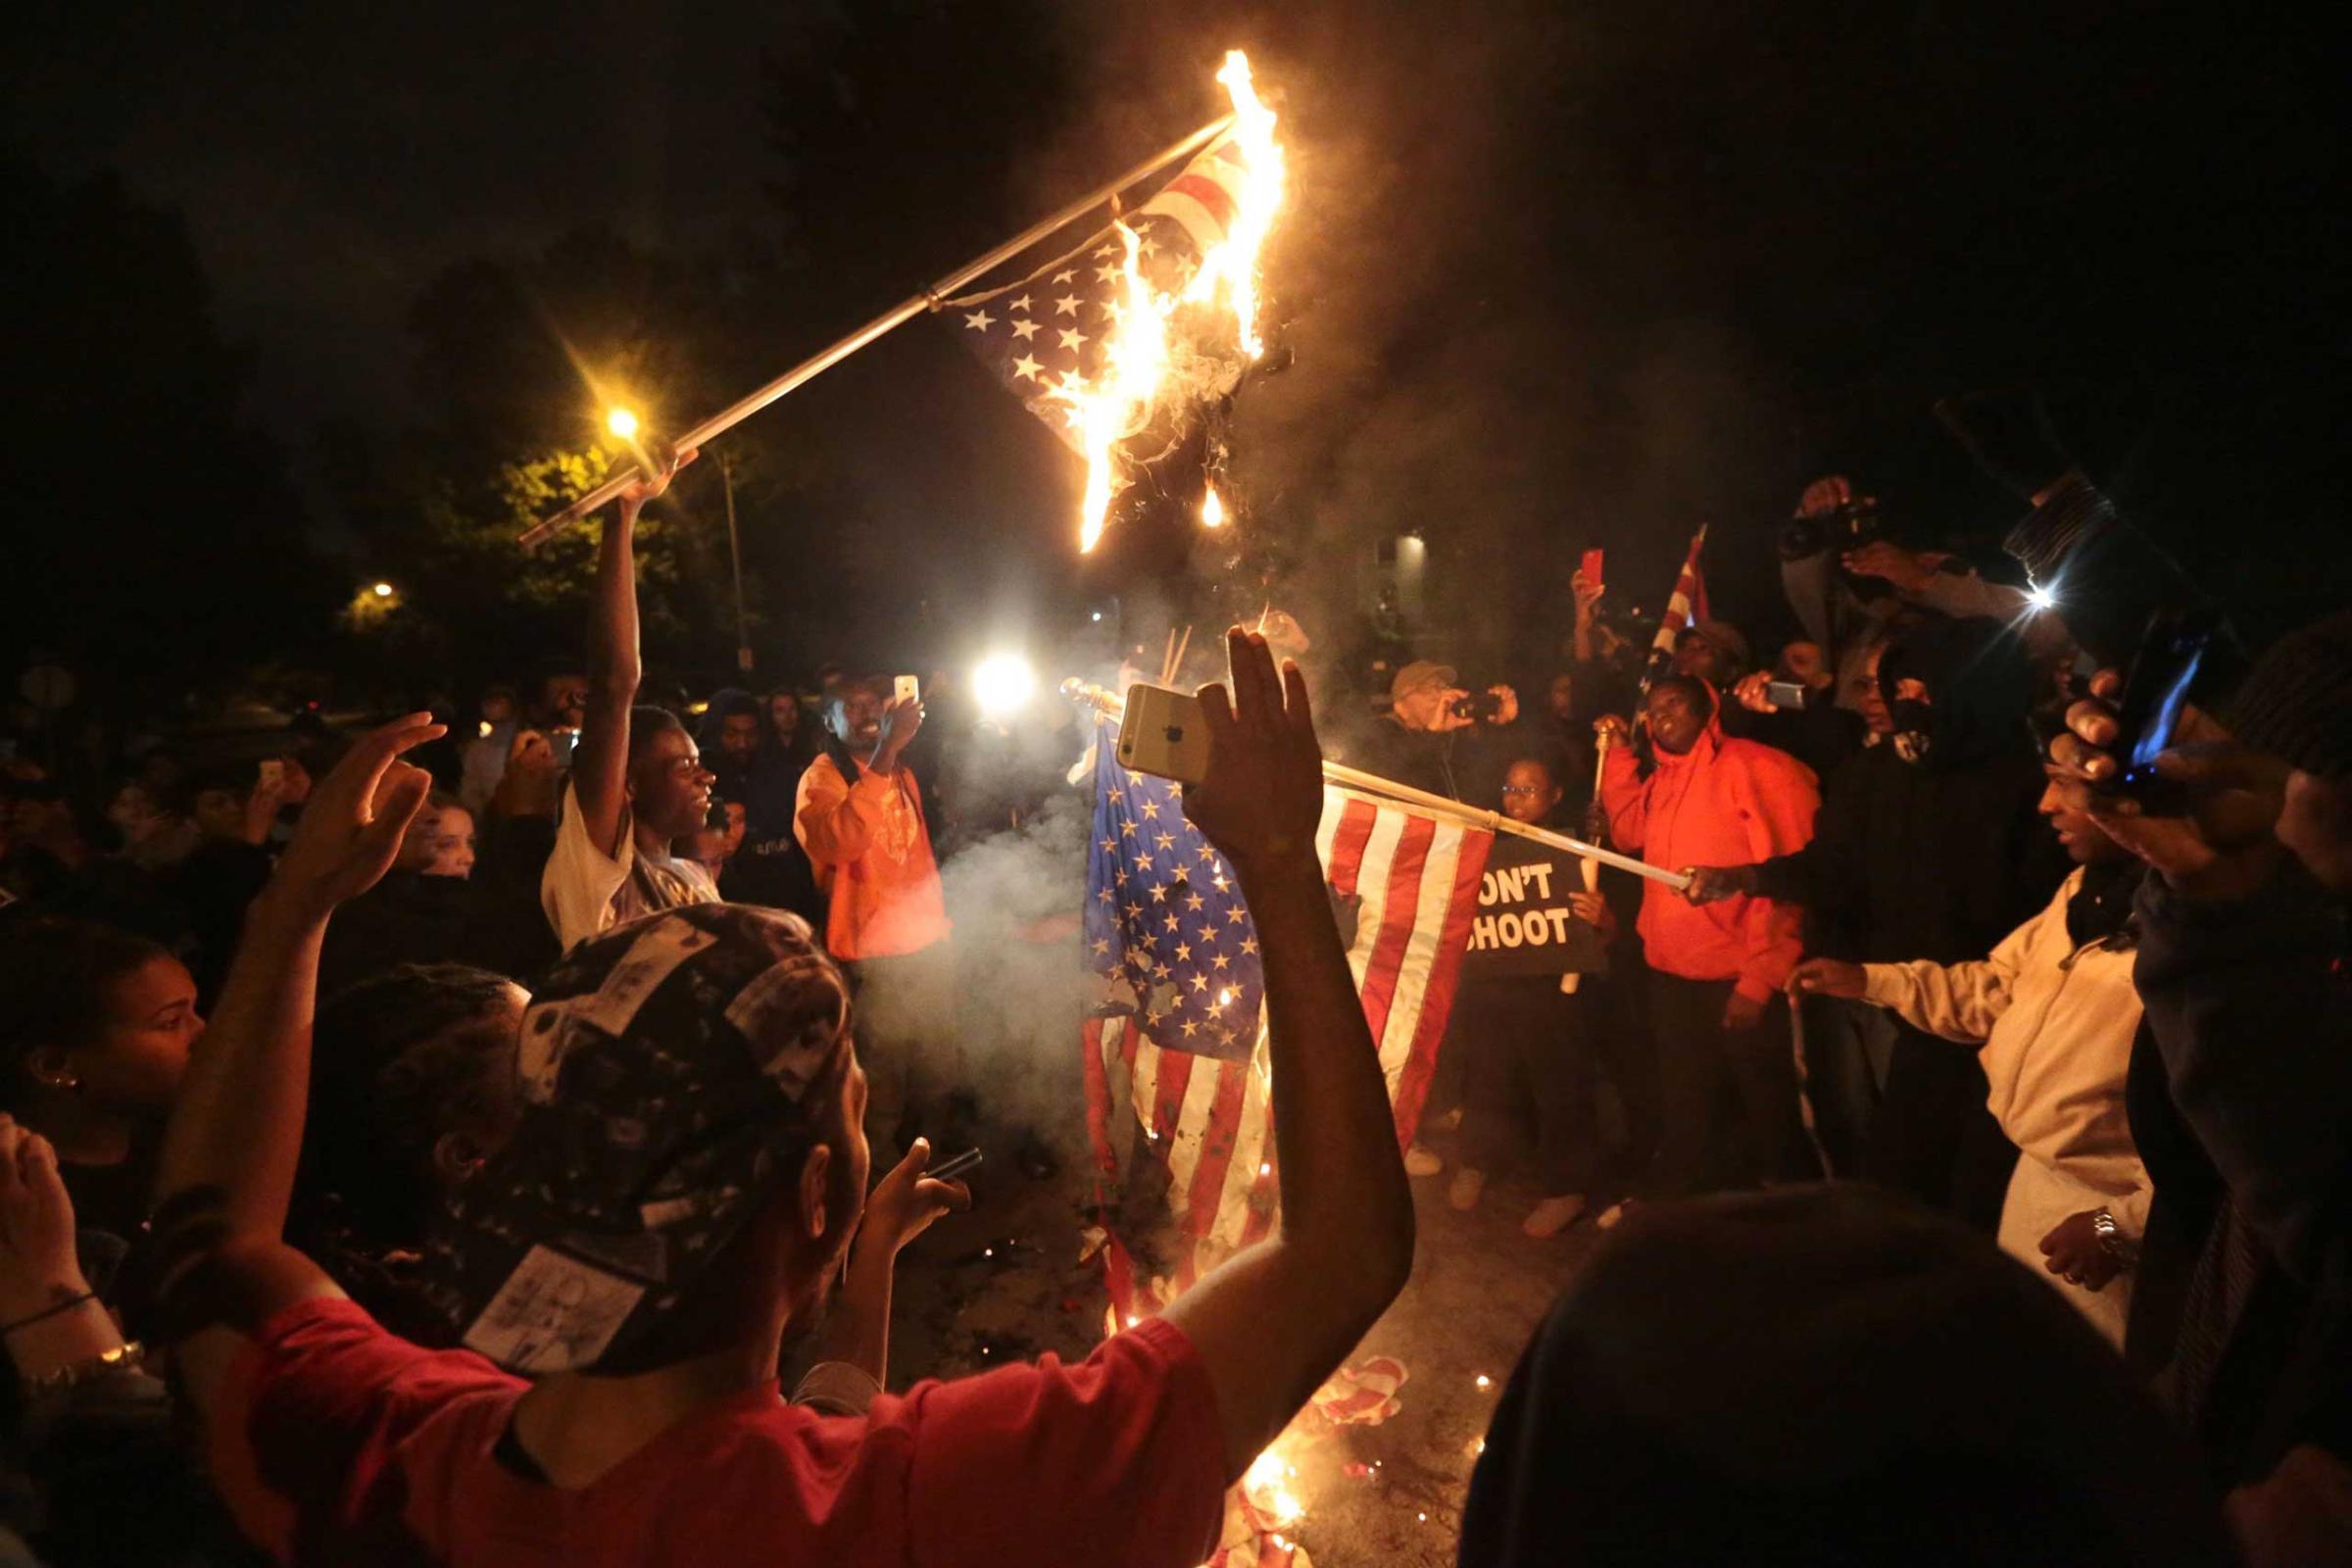 Several American flags are burned during a night of protest after a candlelight vigil for Vonderrit Myers, Jr. in St. Louis on Oct. 8, 2014.